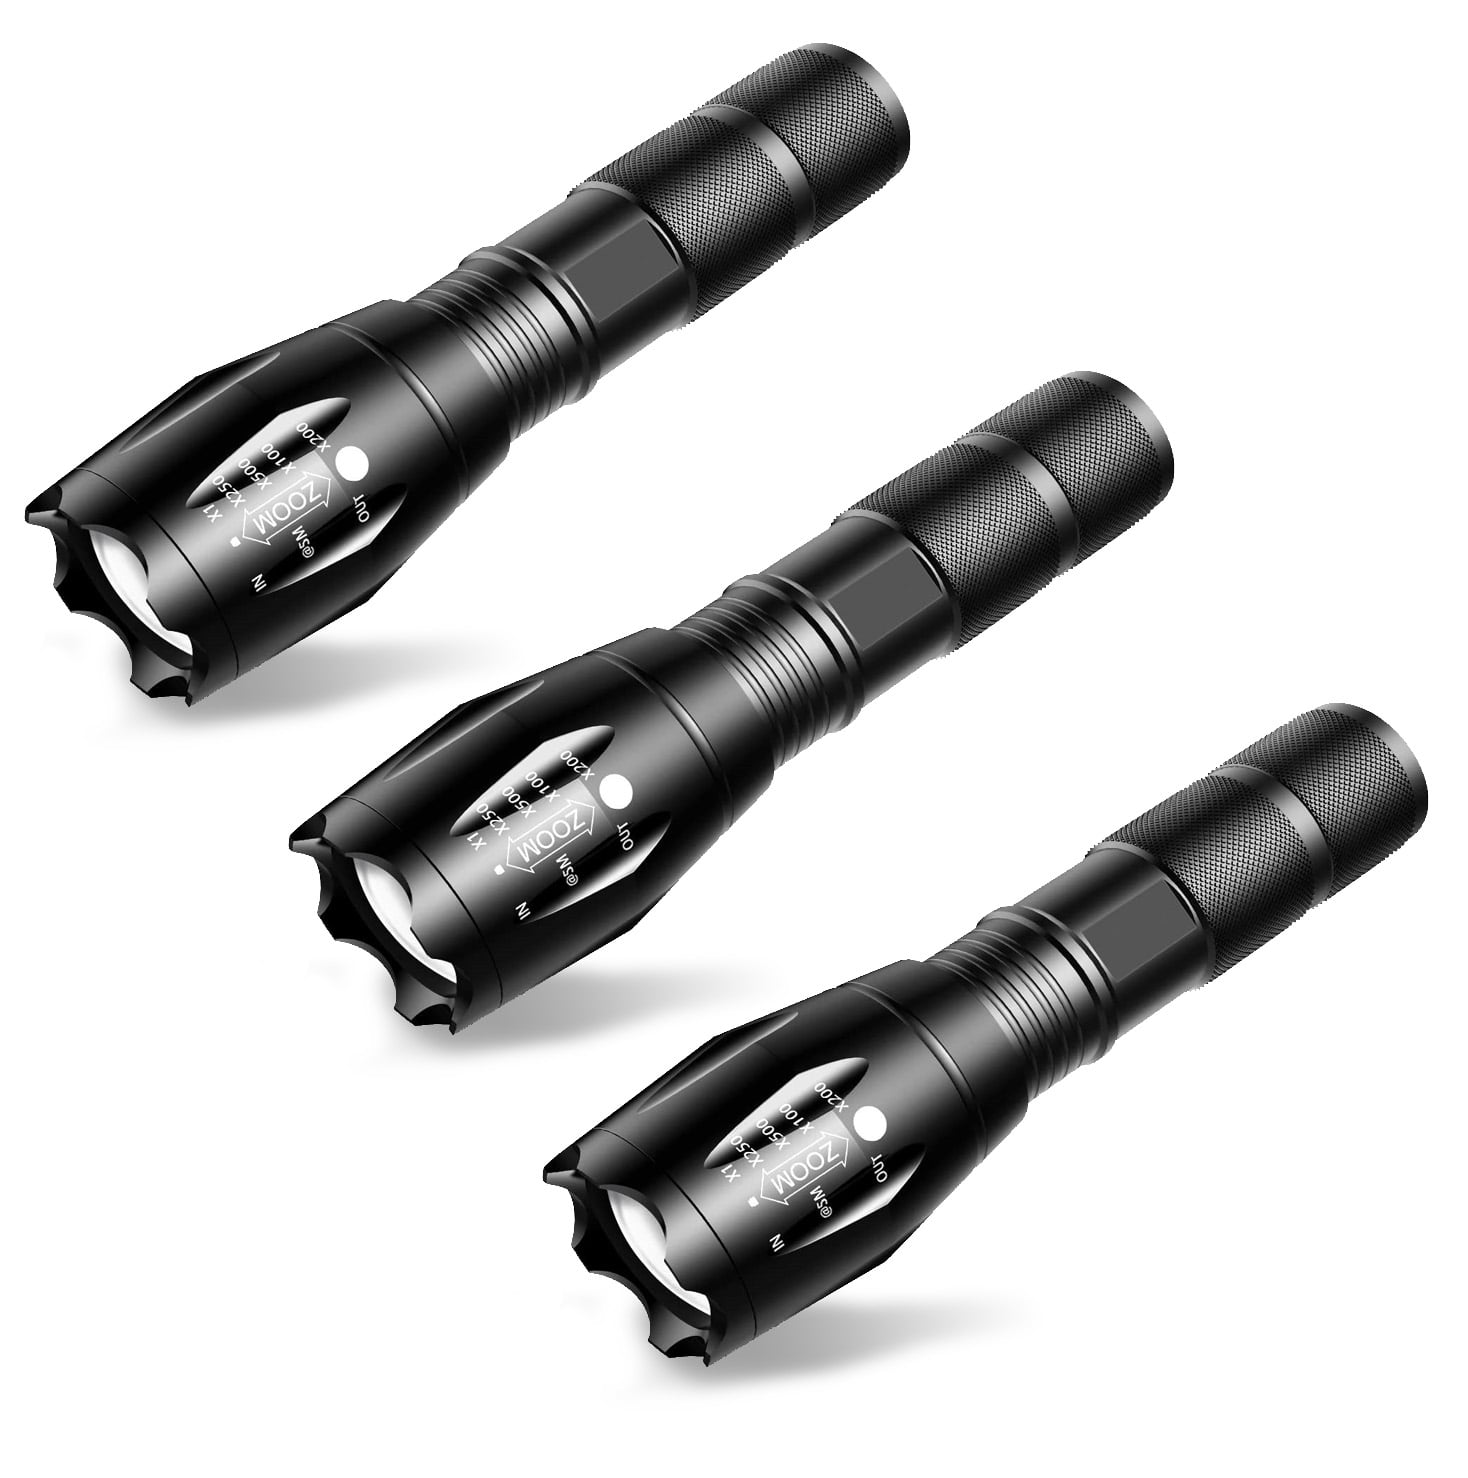 LED Rechargeable Torch Flashlight Adjustable Focus Zoom SOS Water Resistant 